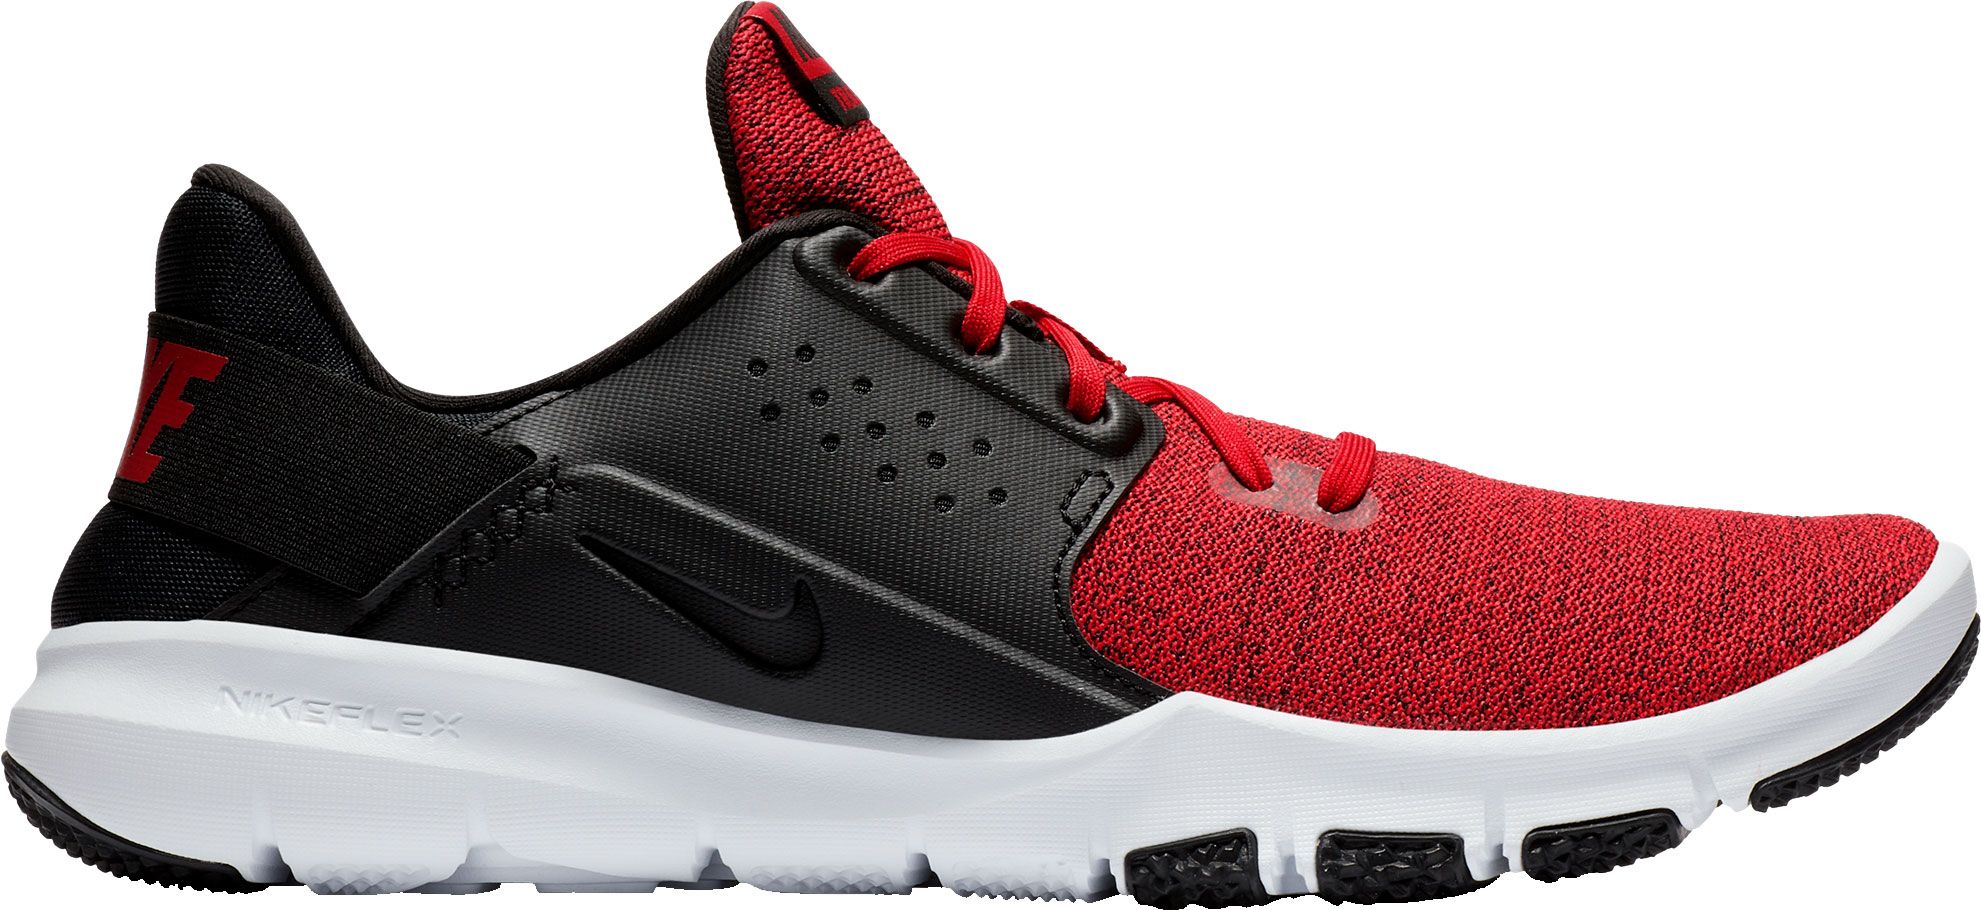 Red Nike Shoes | Best Price Guarantee at DICK'S